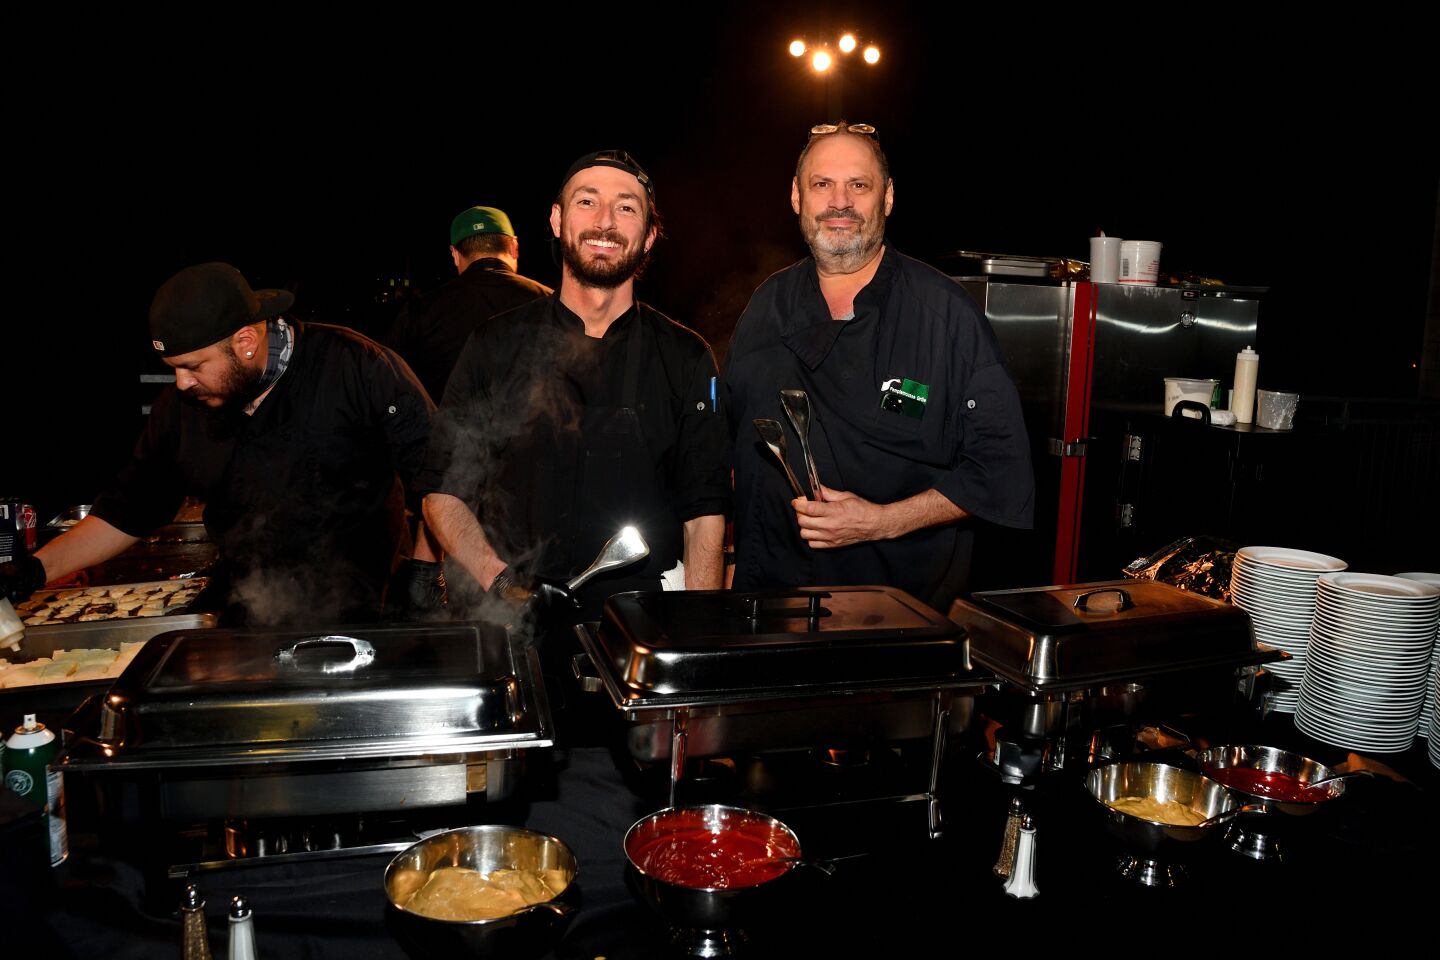 Pamplemousse Grille owner and chef Jeffrey Strauss (right) and staff serve late-night treats during the La Jolla Playhouse Gala after-party.